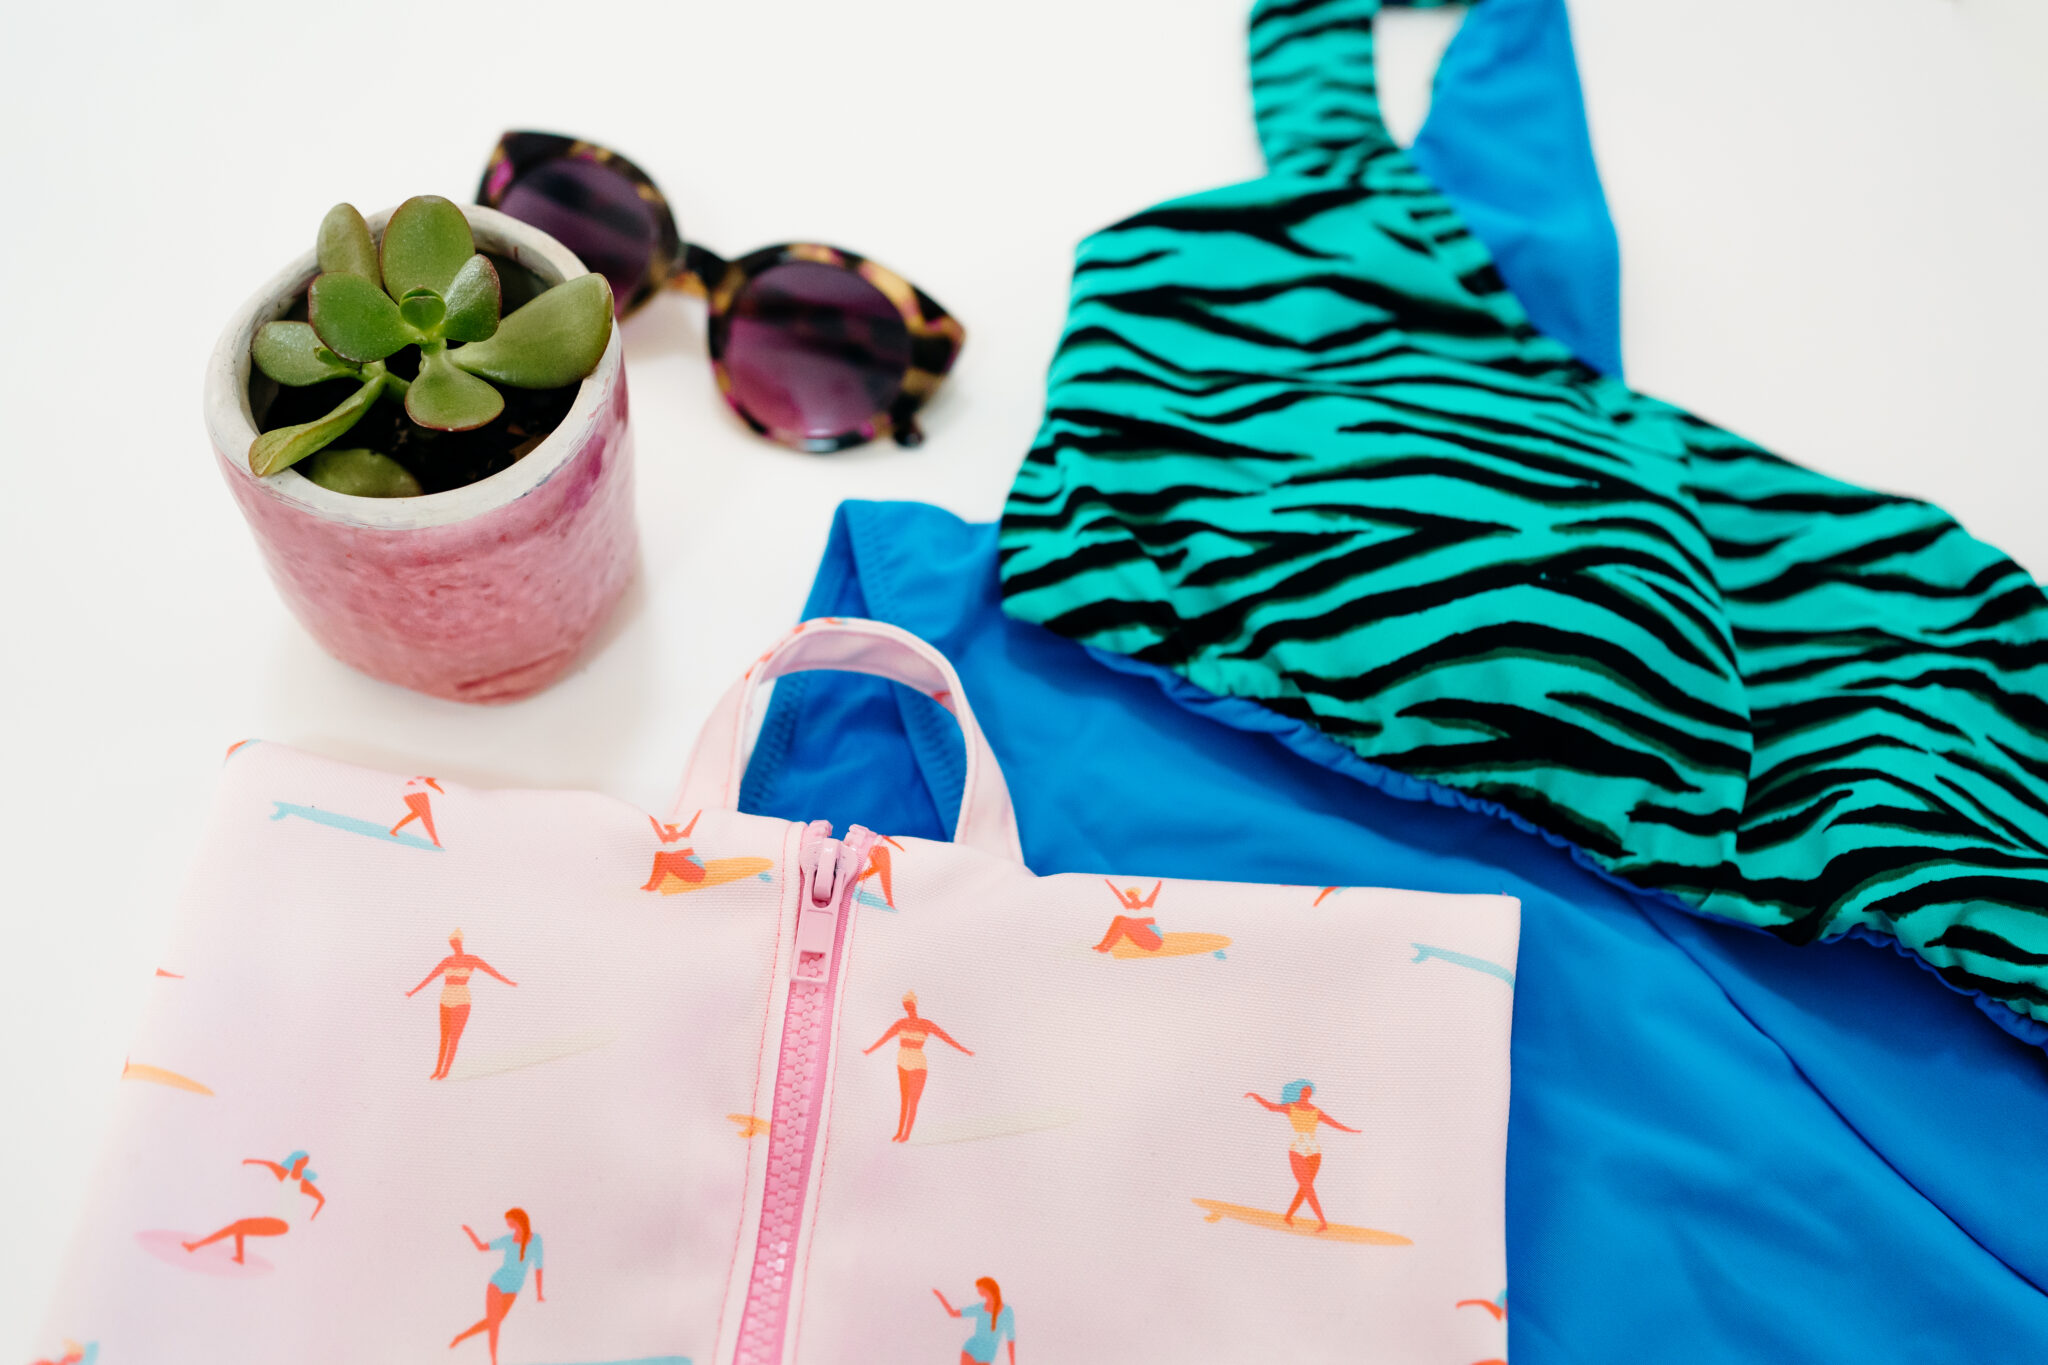 A fabric rectangle featuring a design with small female surfers surfing through a pink background lays on a white surface. A pink zipper has been stitched up the middle. A U-shaped handle in the same fabric has been sewn to the top center of the bag. The bag is laying on a white surface and to the left of a teal-and-black swimsuit and blue wetsuit. A small succulent is to the top left along with tortoiseshell sunglasses.